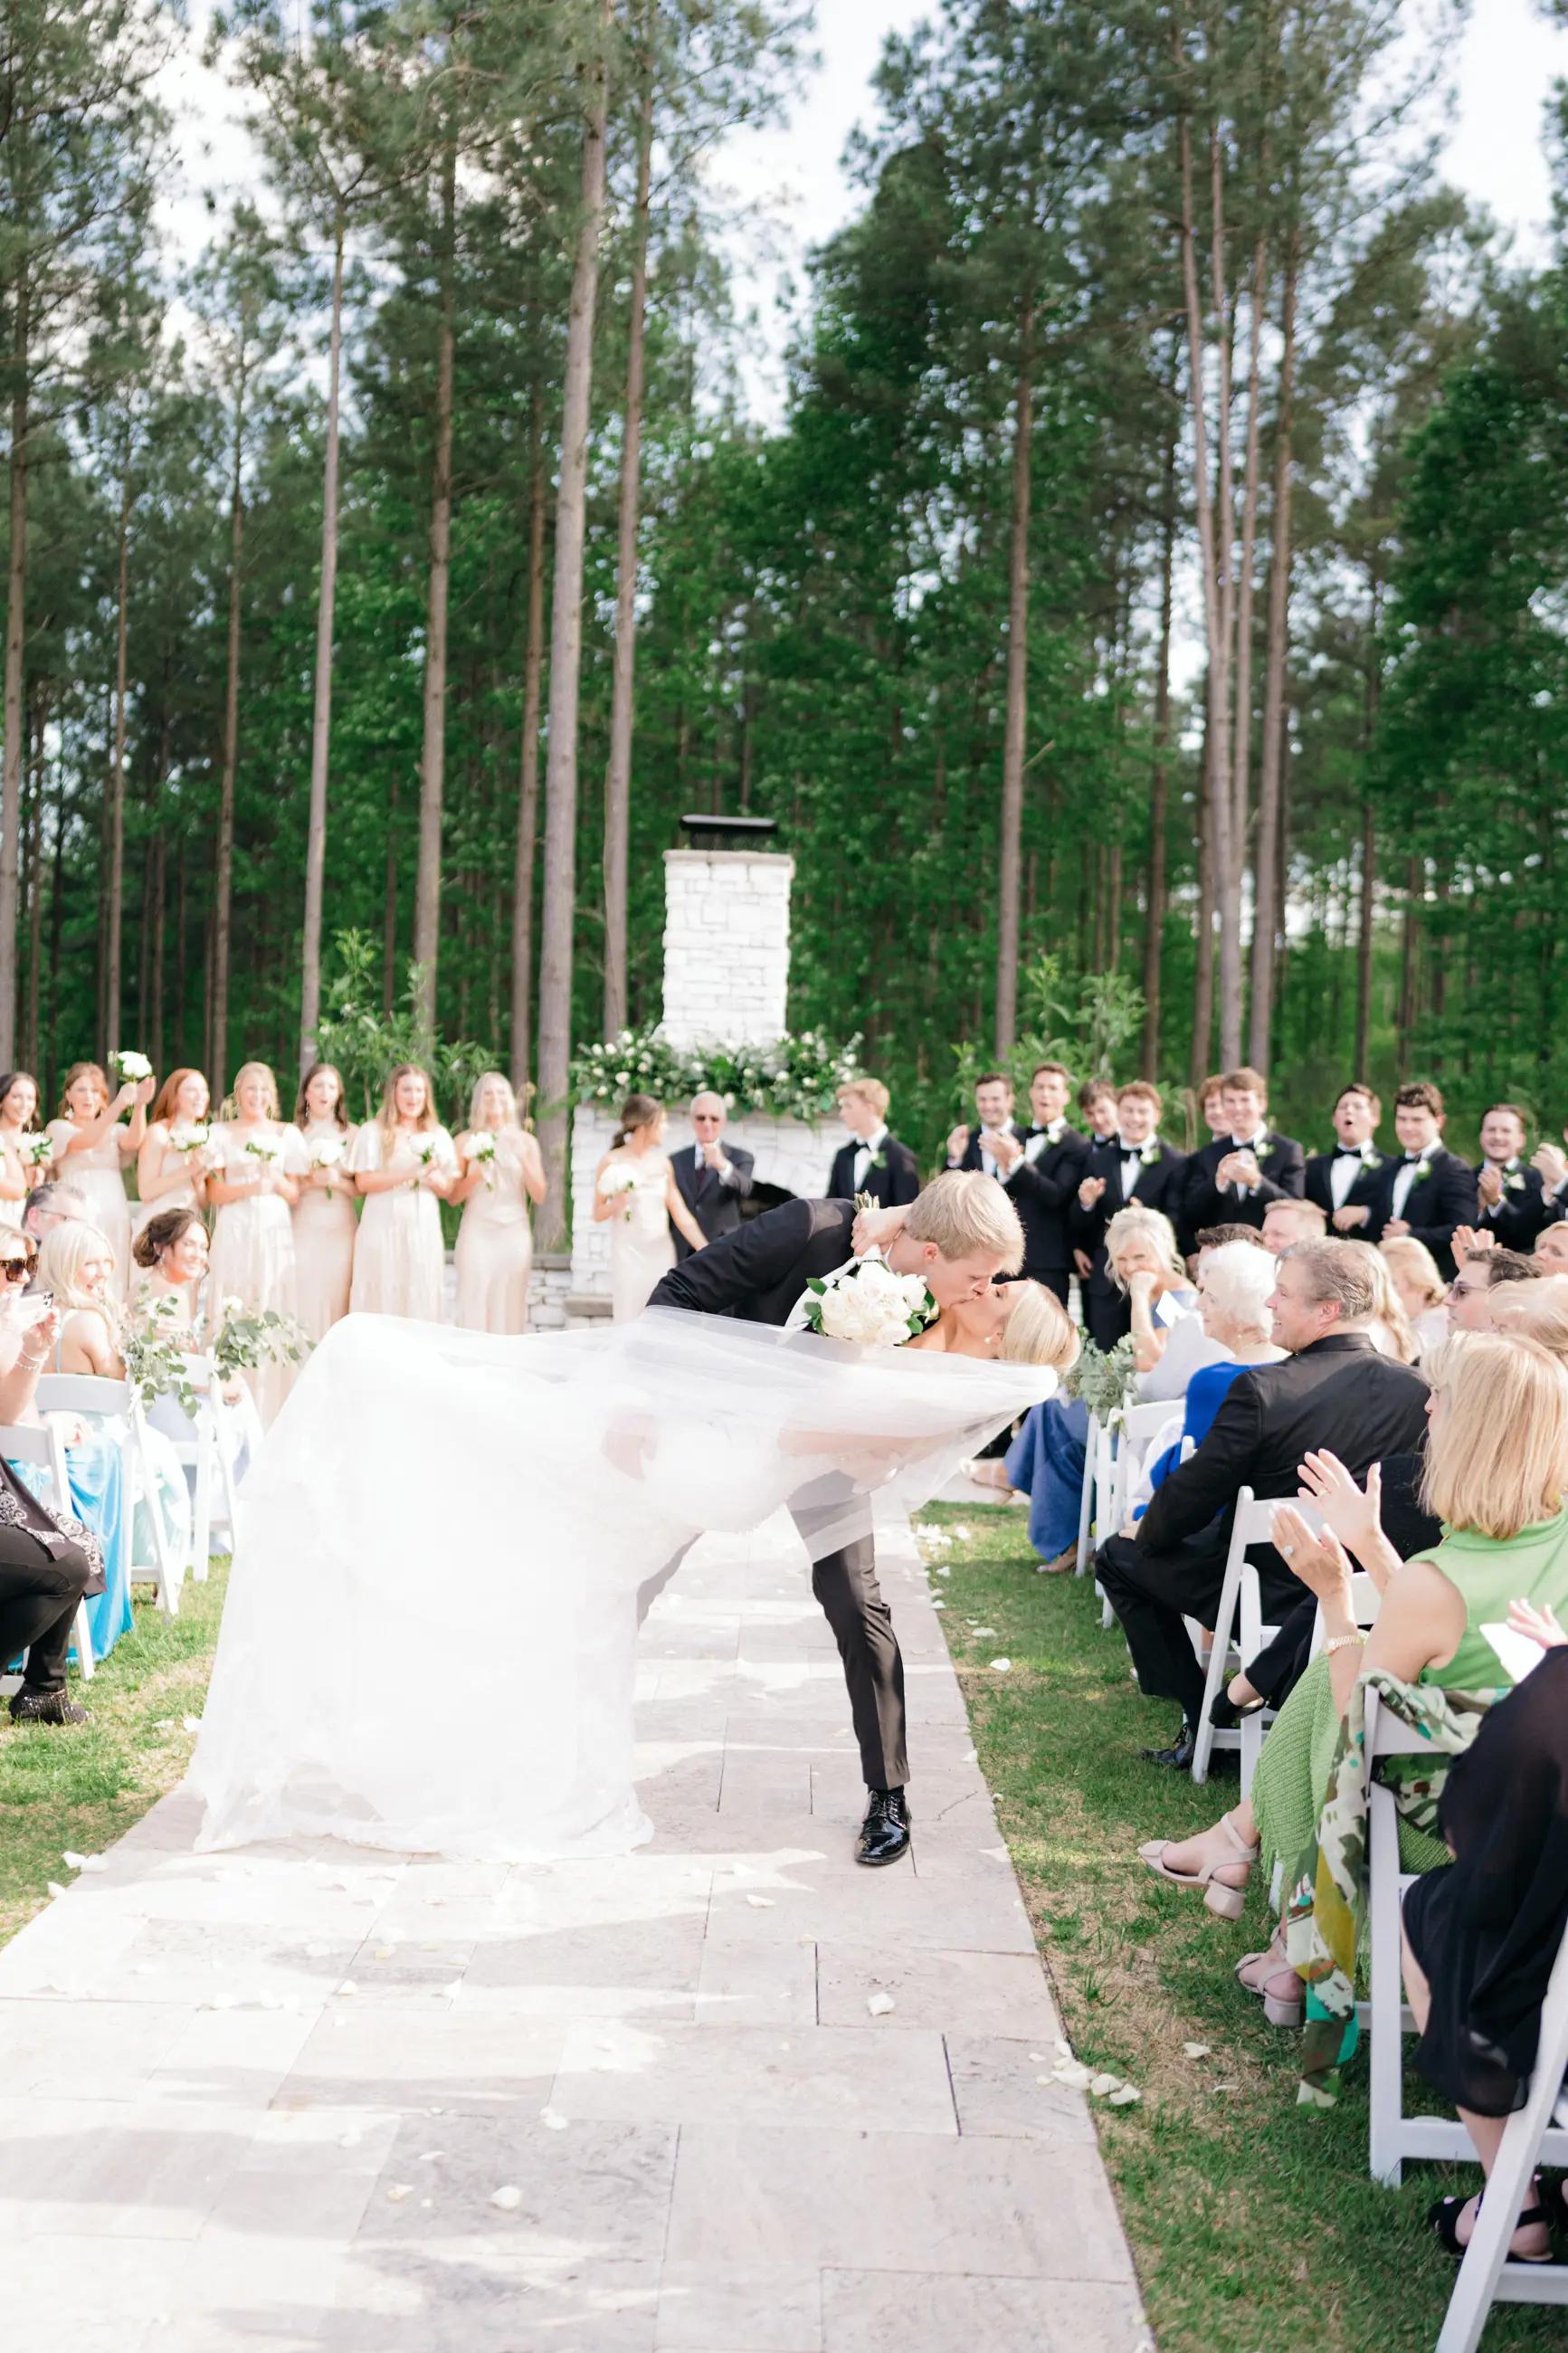 Bride and groom dipping kissing wedding aisle